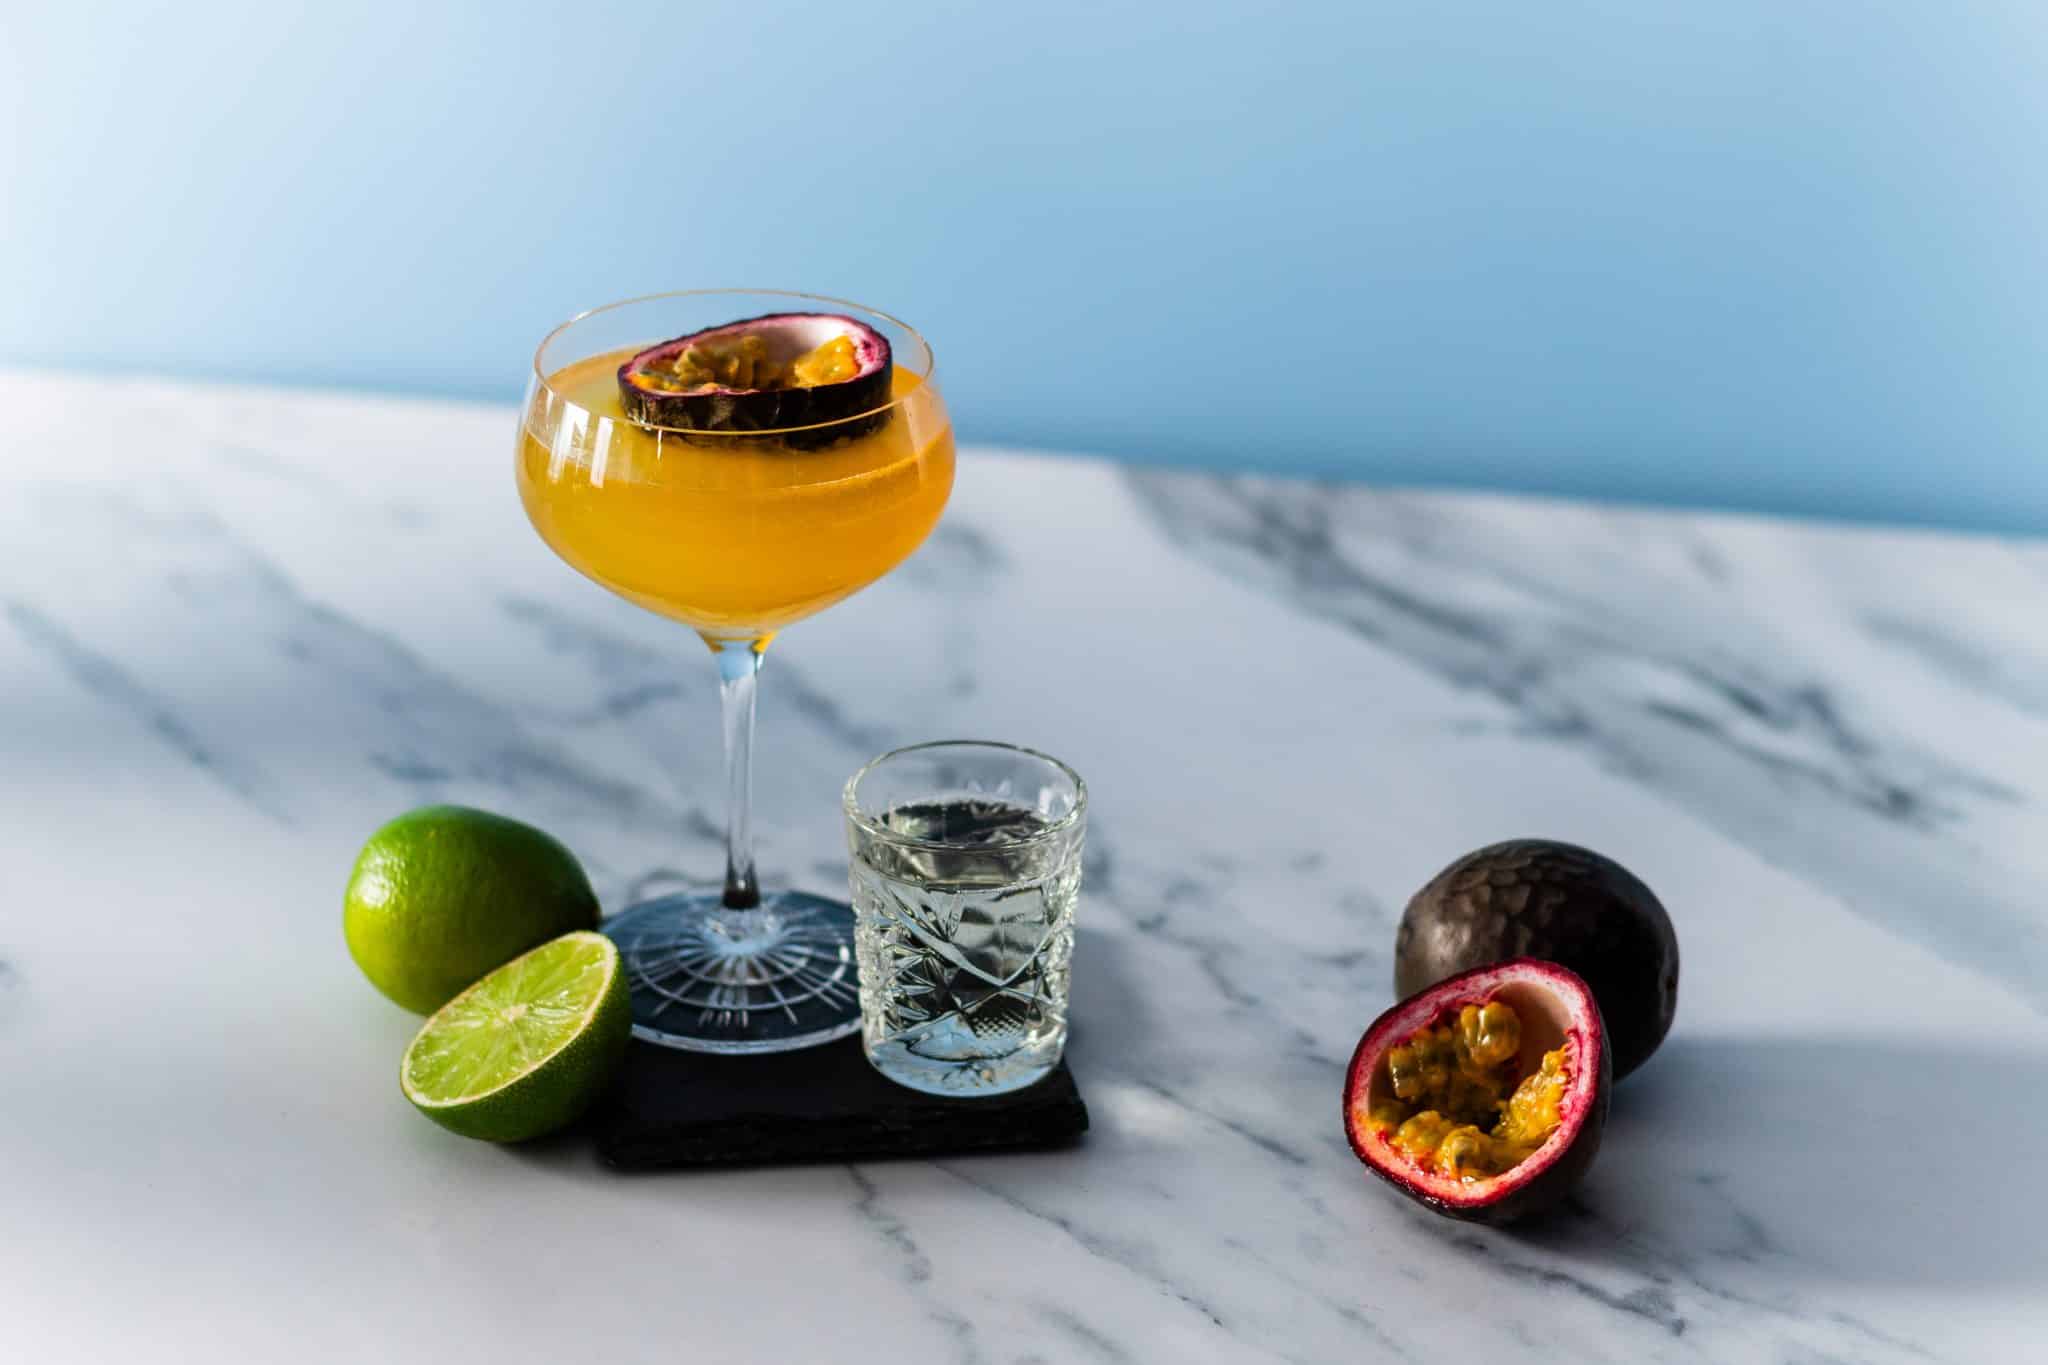 A side shot of a Pornstar Martini cocktail in a martini glass on a black stone coaster with a Prosecco shot, limes and passionfruit, placed on a white marmol table, in front of a blue wall.